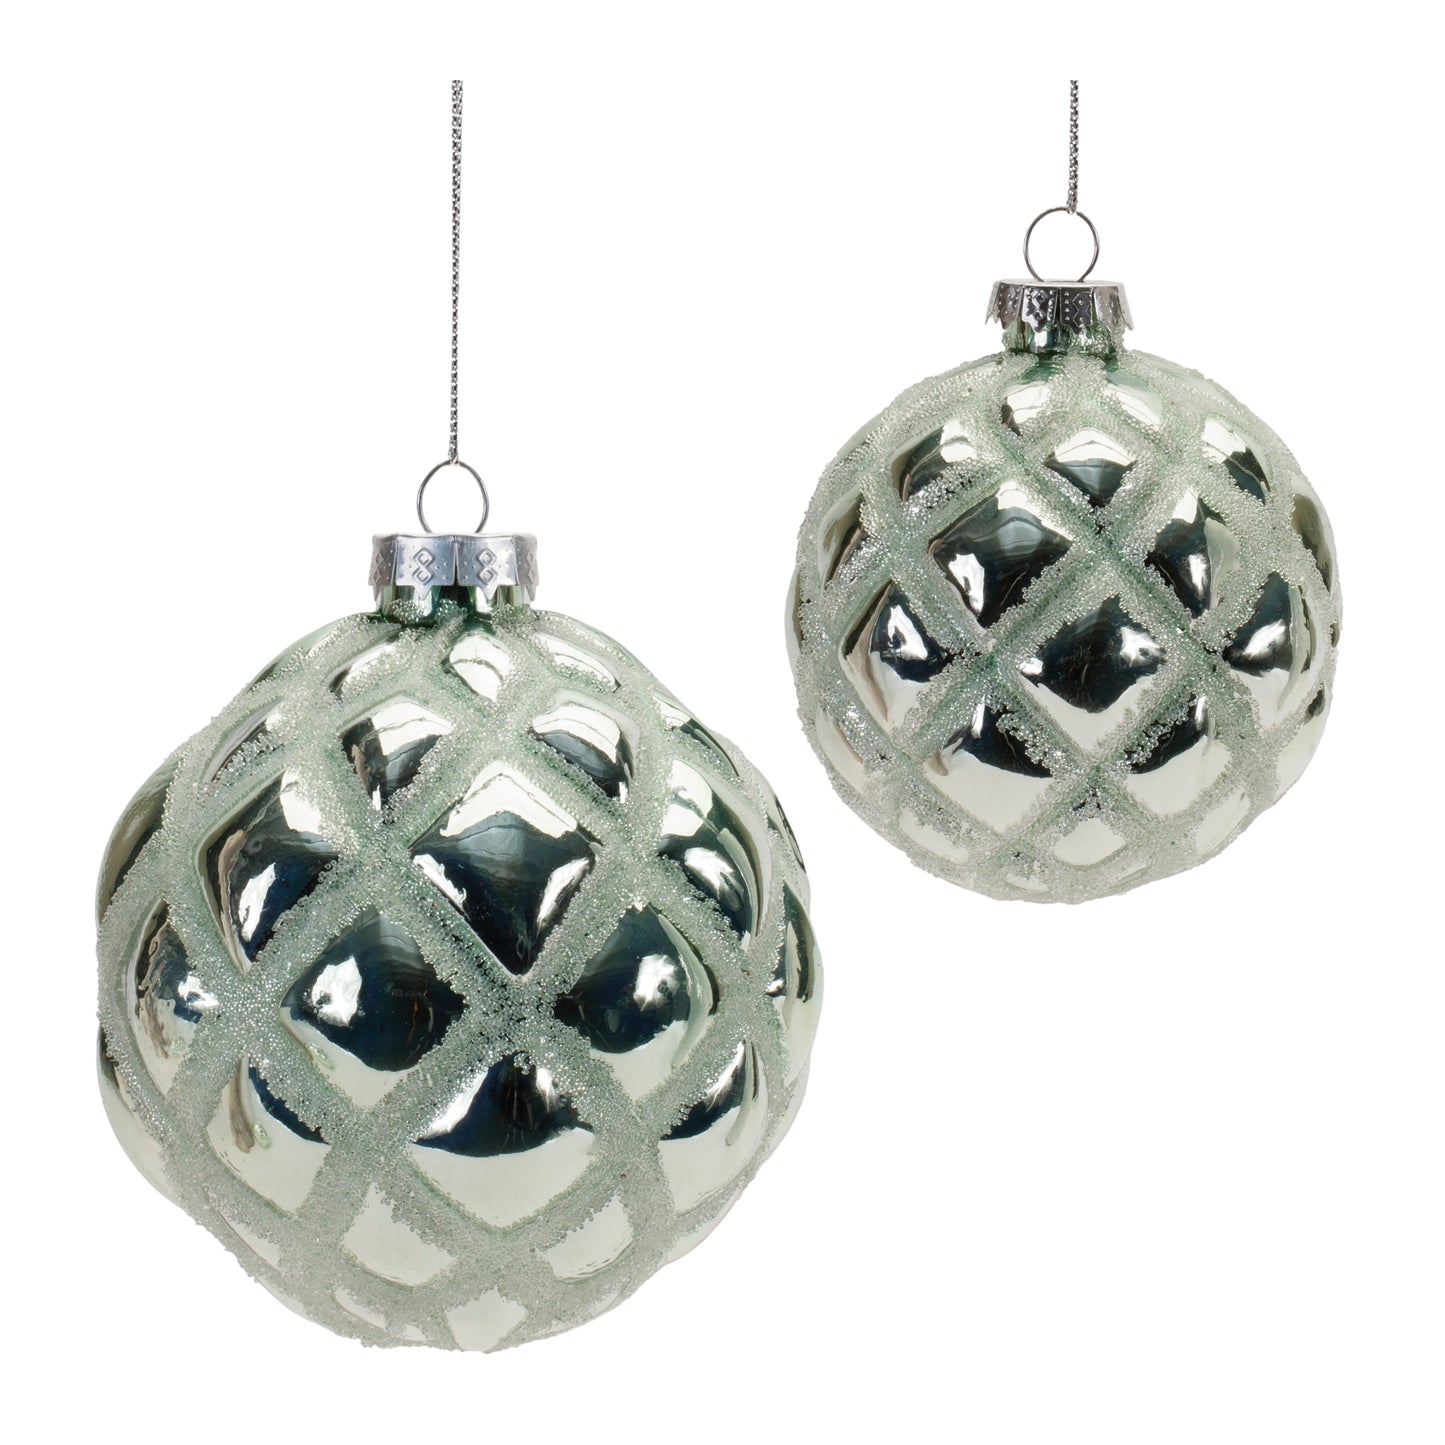 3"D or 4"D Silver Metallic Quilted Glass Ornament